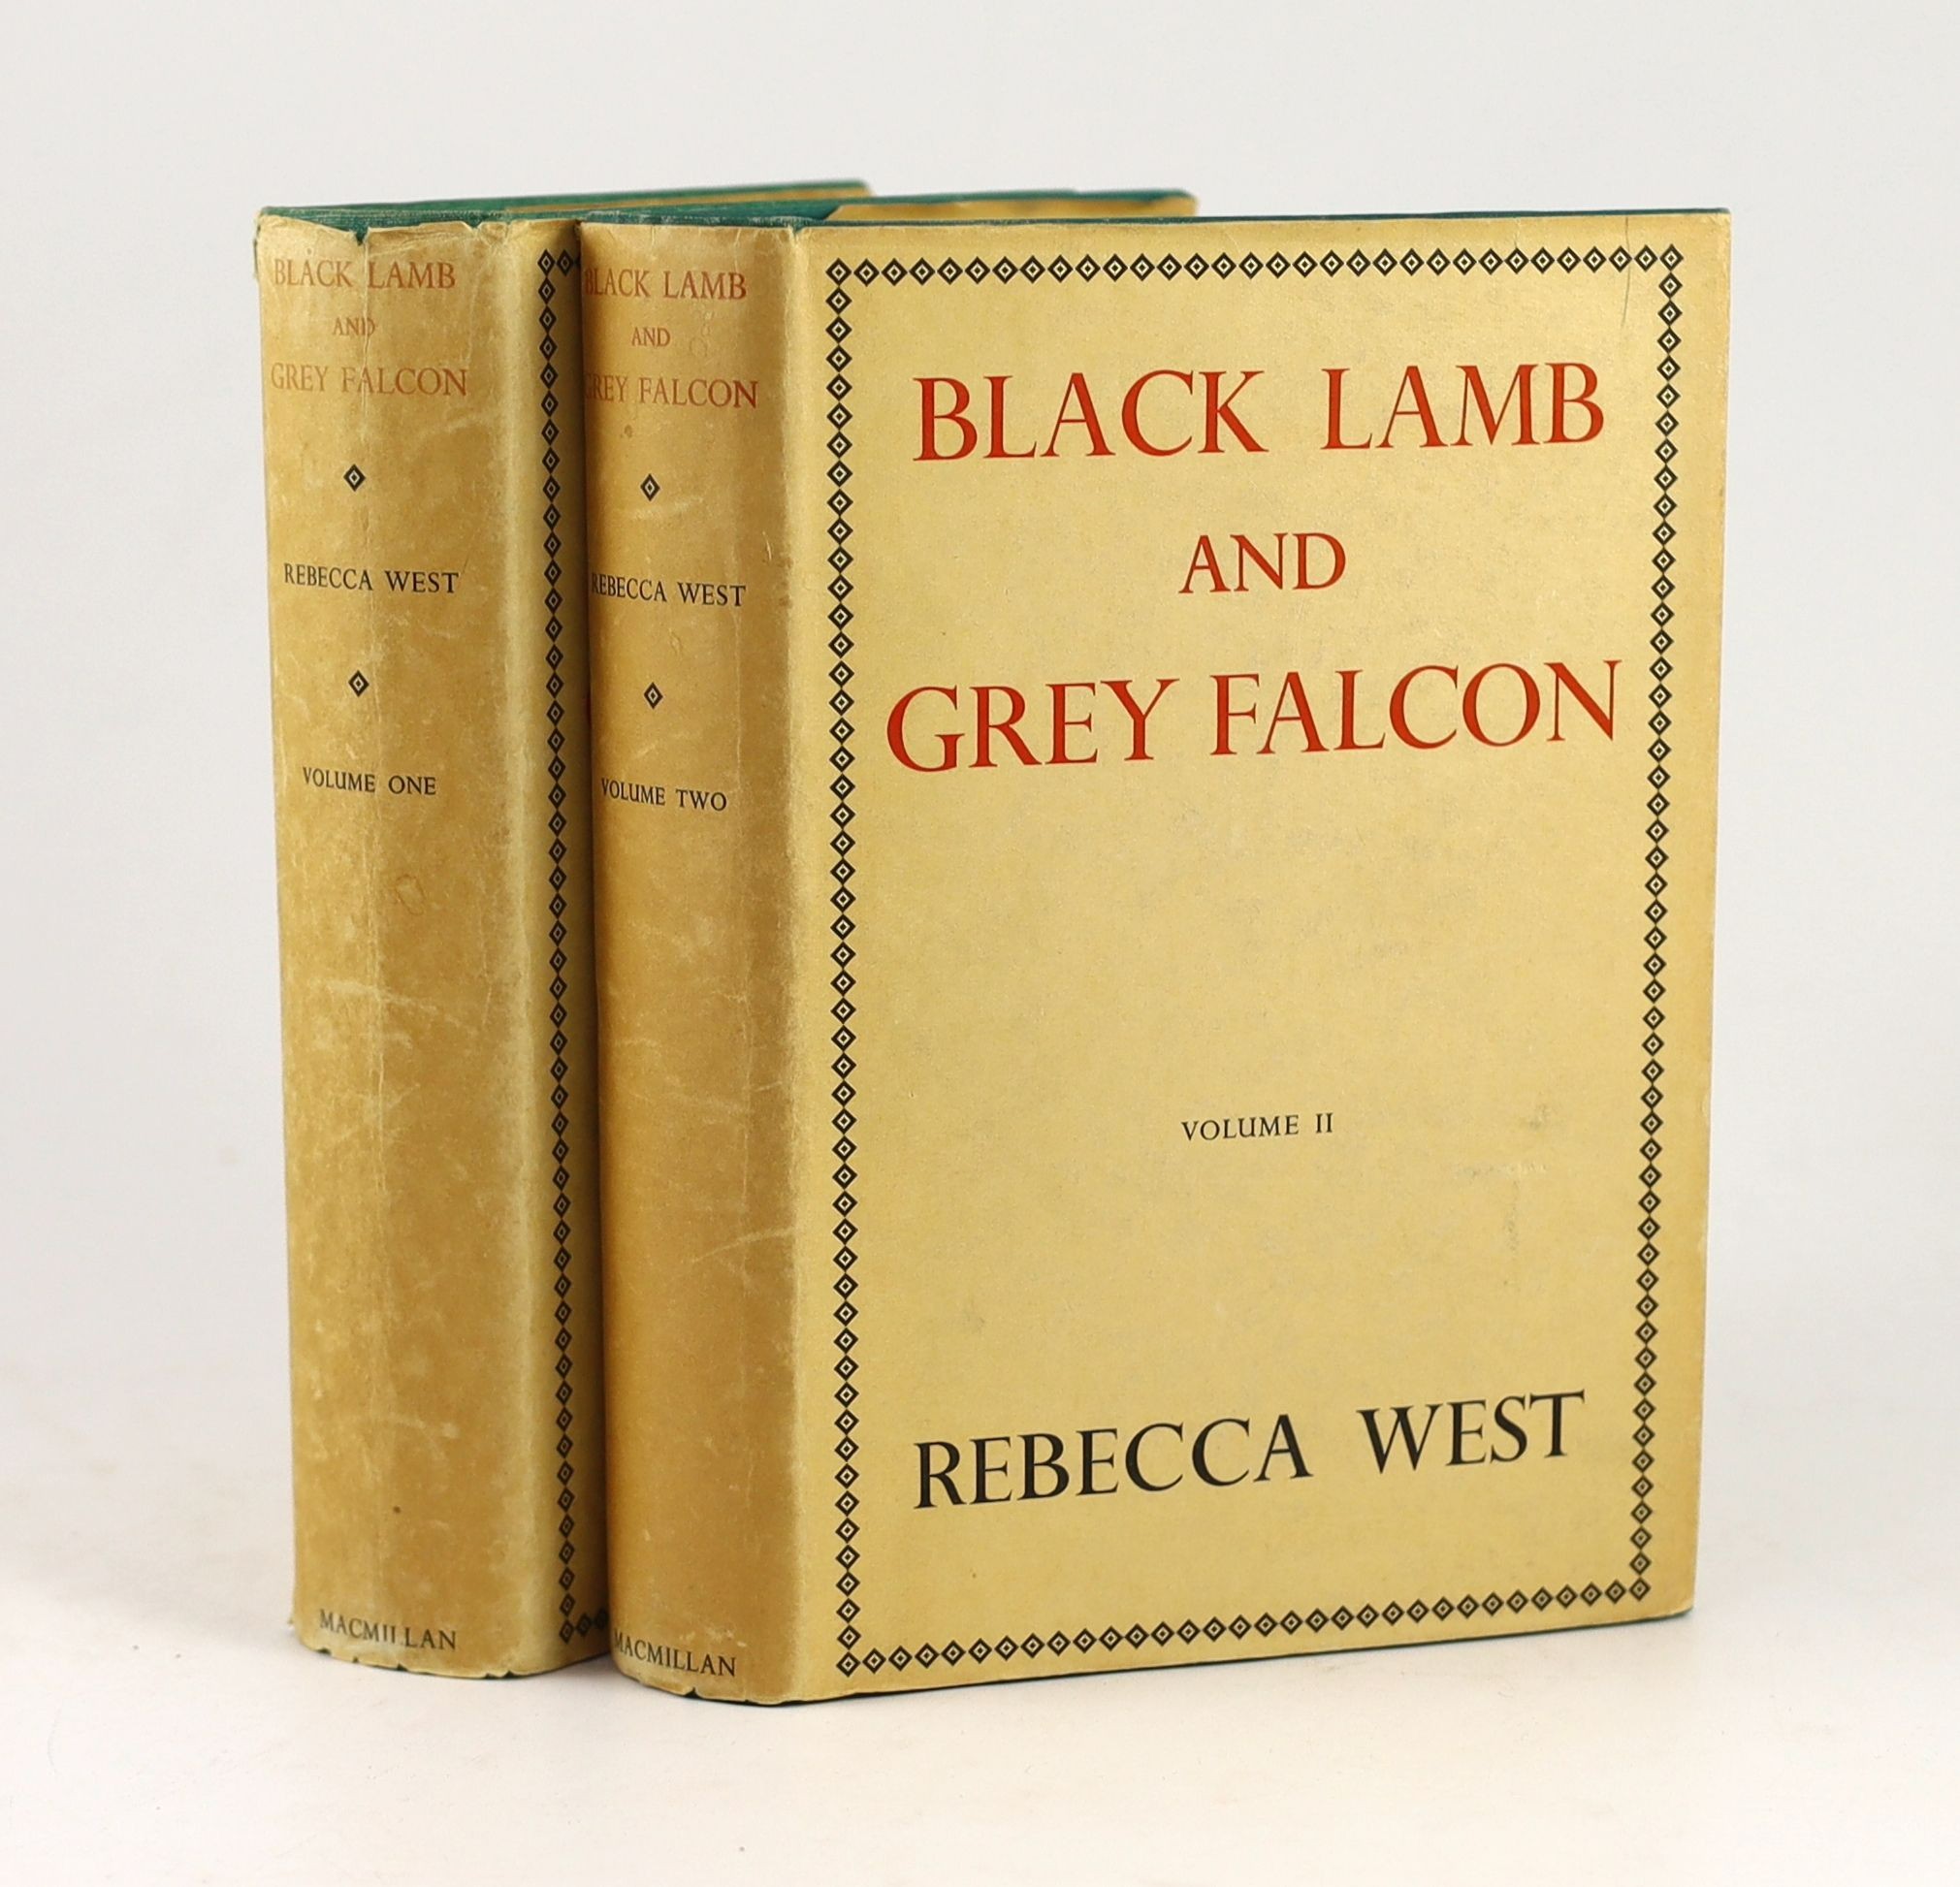 West, Rebecca - Black Lamb and Grey Falcon: The Record of a Journey Through Yugoslavia in 1937, 1st edition, 2 vols, 8vo, green cloth in unclipped d/j’s, cartographic endpapers, with 32 photographic plates, Macmillan & C